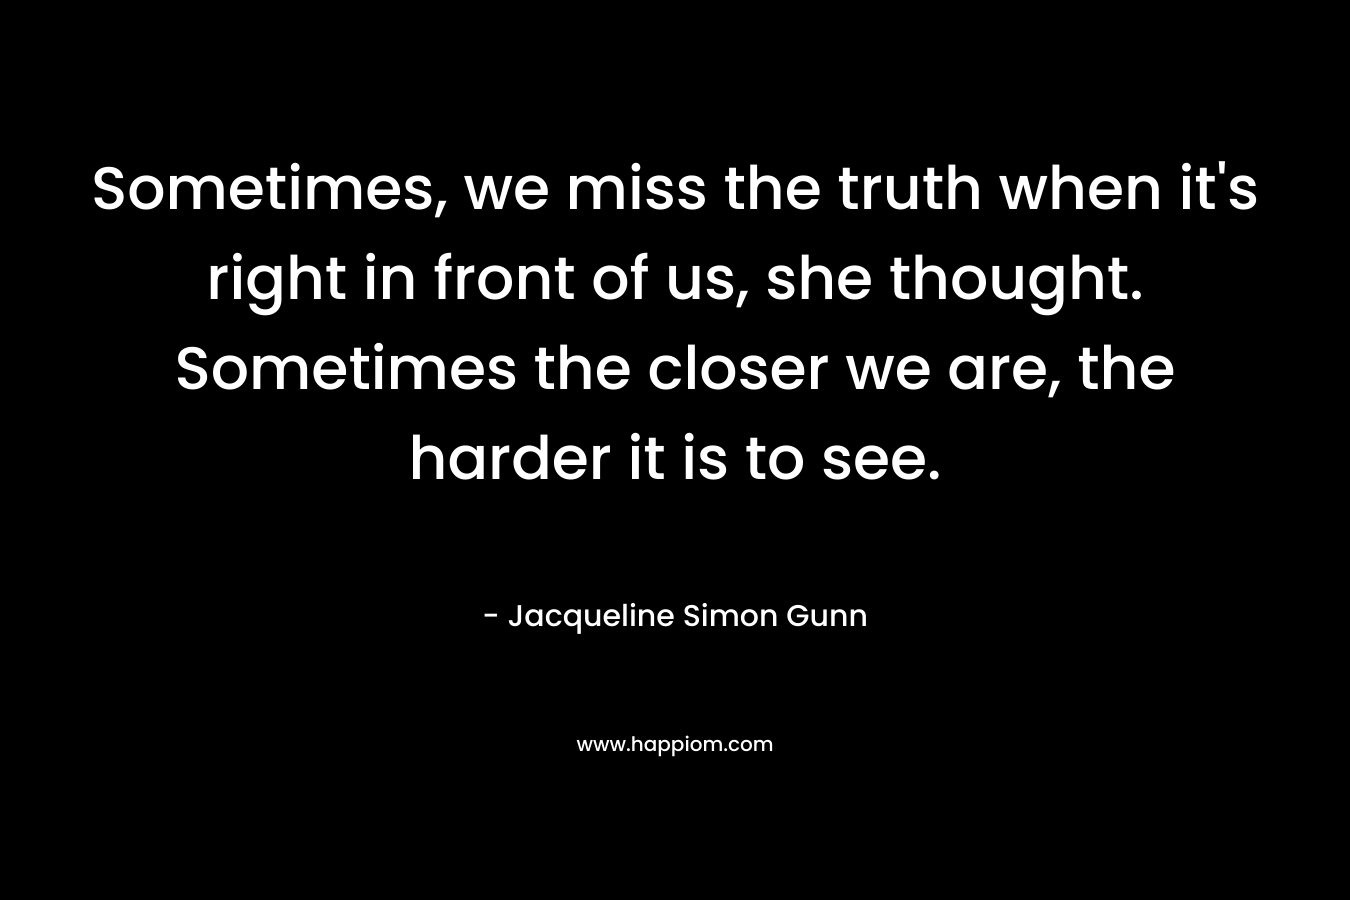 Sometimes, we miss the truth when it's right in front of us, she thought. Sometimes the closer we are, the harder it is to see.